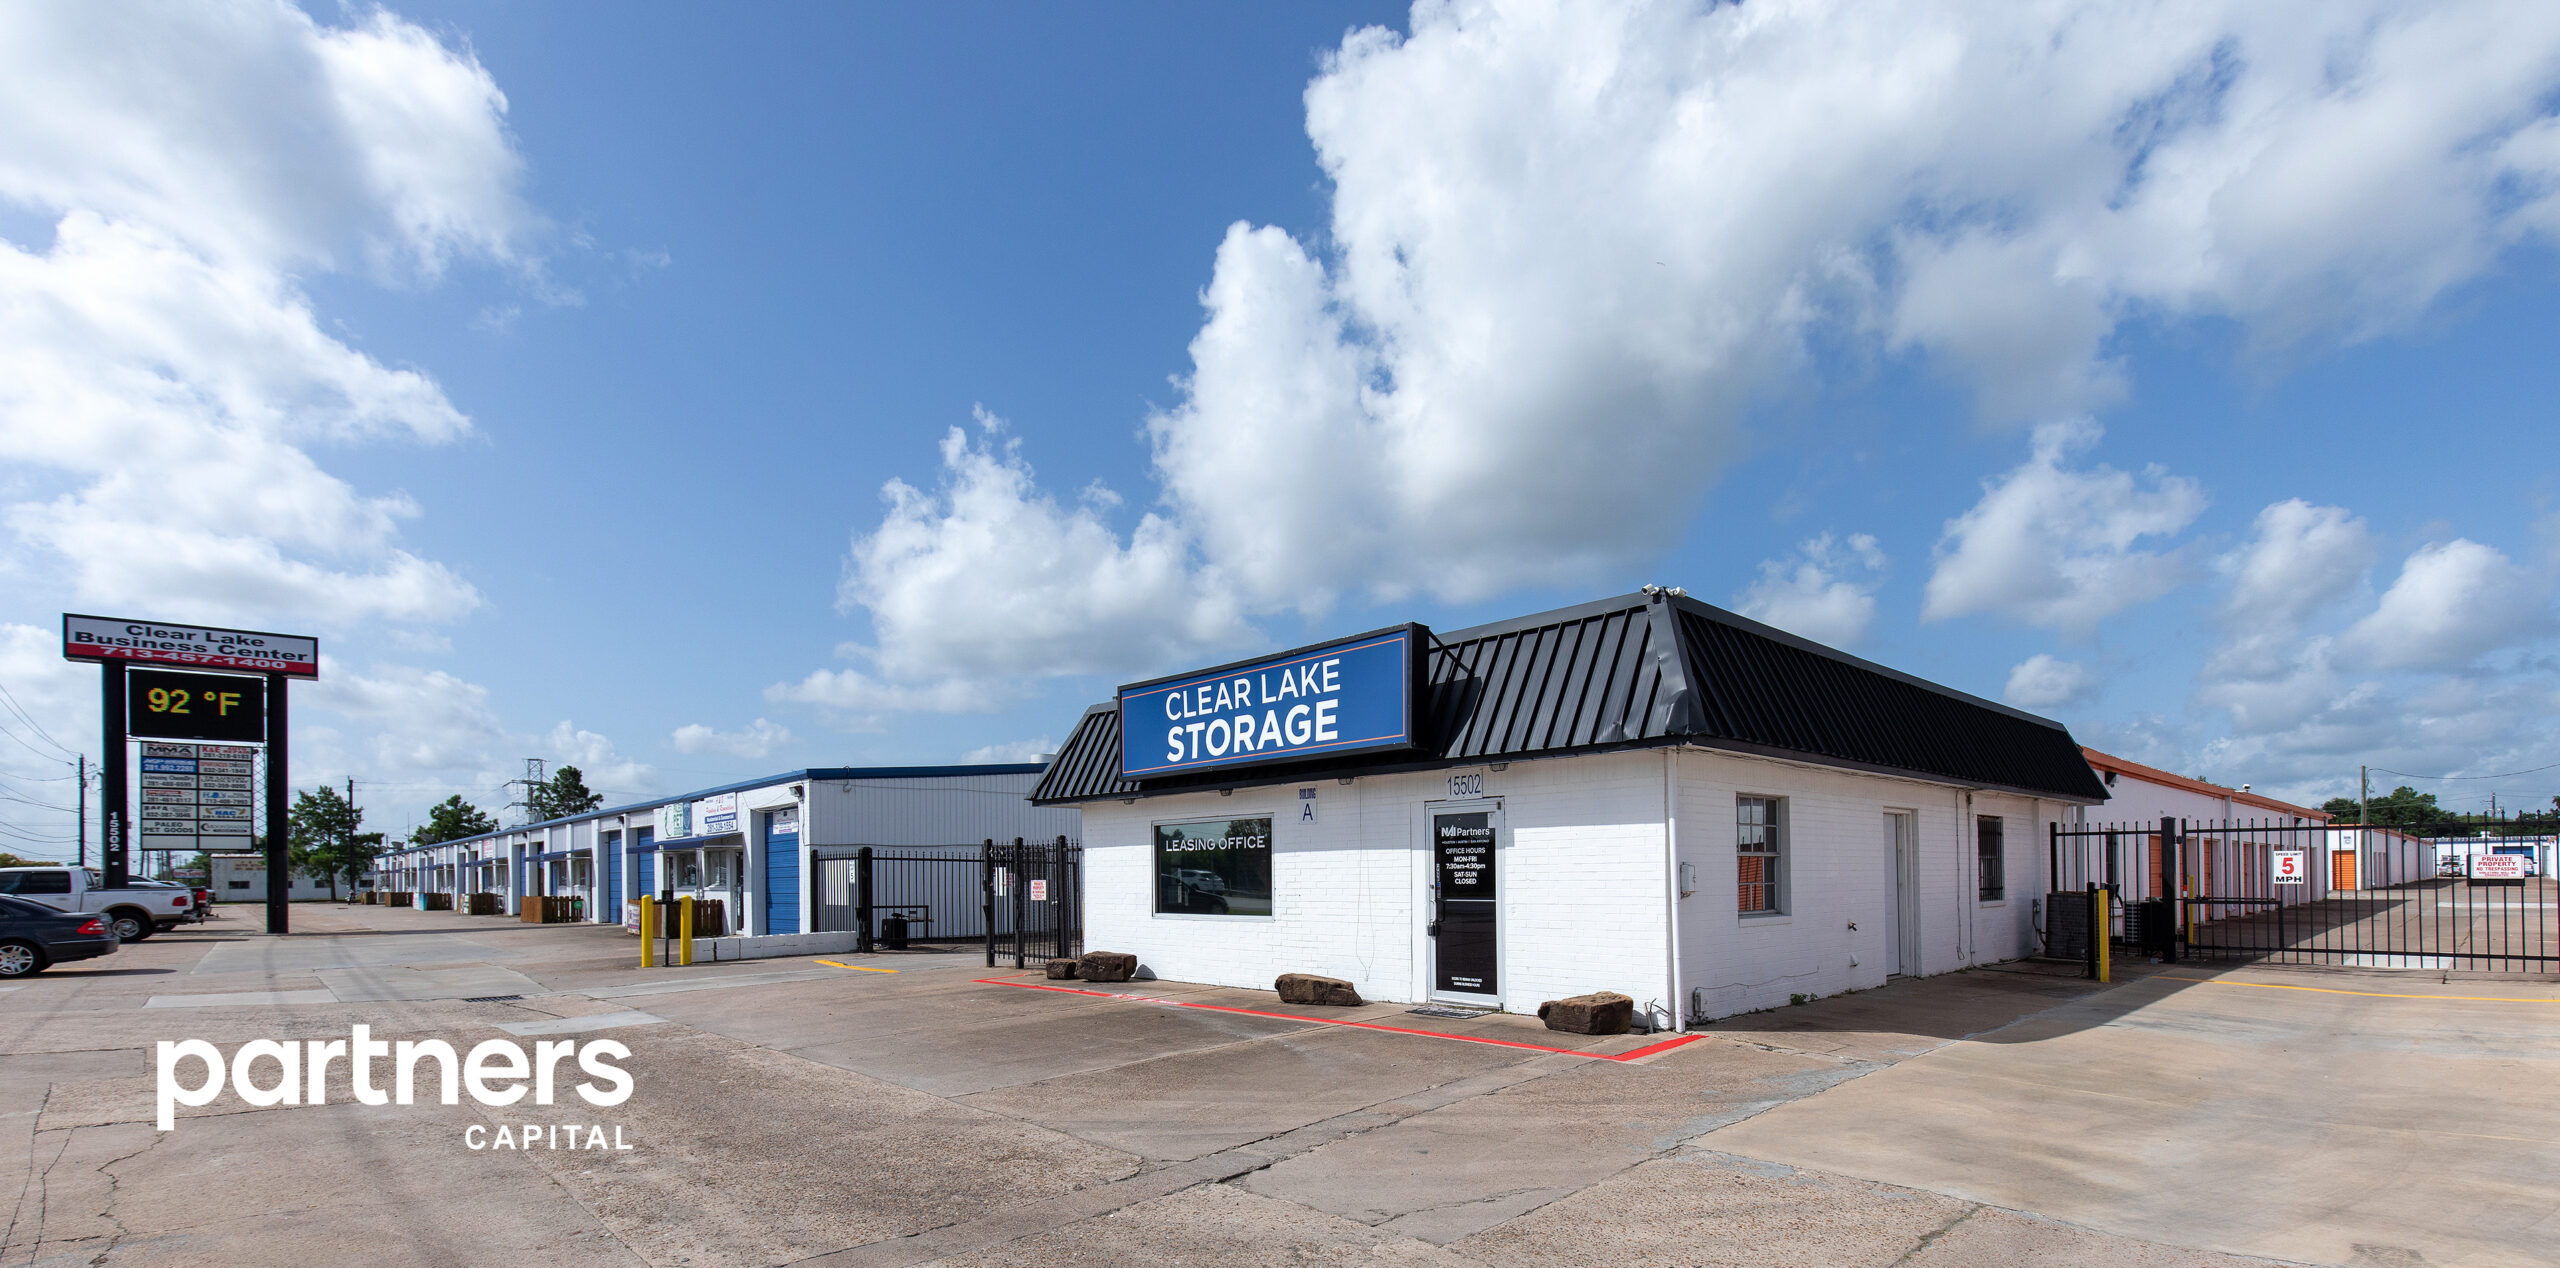 Partners Capital sells Clear Lake Business Center in Webster, Texas